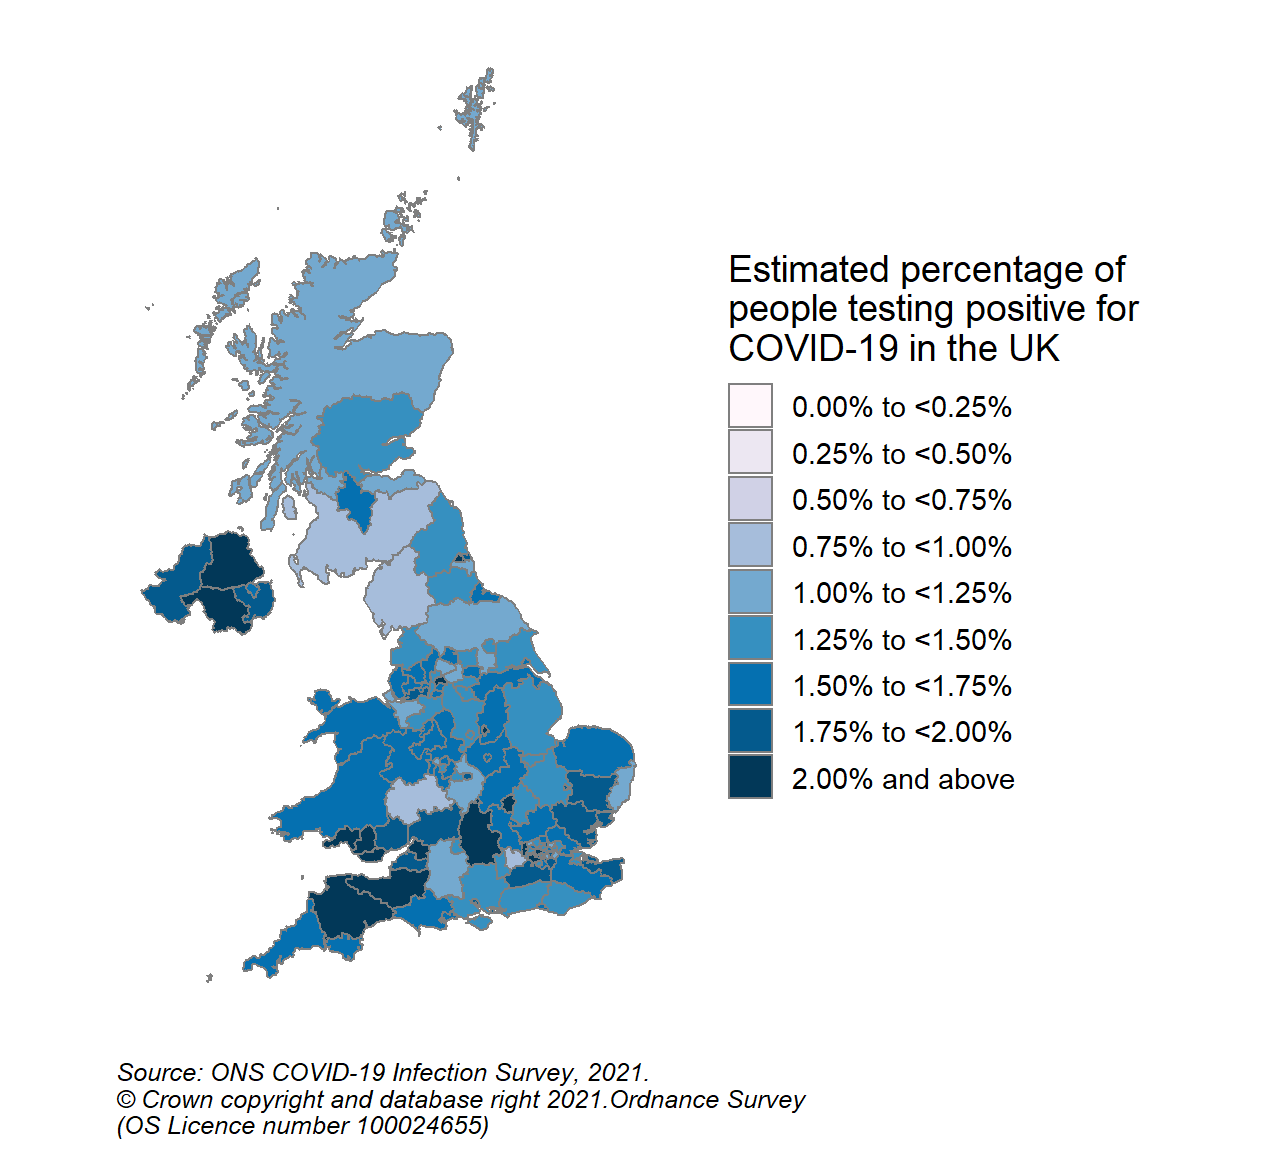 This colour coded map of the UK shows the modelled estimates of the percentage of the private residential population testing positive for COVID-19, by COVID-19 Infection Survey sub-regions. In Scotland, these sub-regions are comprised of Health Boards. The regions are: 123 - NHS Grampian, NHS Highland, NHS Orkney, NHS Shetland and NHS Western Isles, 124 - NHS Fife, NHS Forth Valley and NHS Tayside, 125 - NHS Greater Glasgow & Clyde, 126 - NHS Lothian, 127 - NHS Lanarkshire, 128 - NHS Ayrshire & Arran, NHS Borders and NHS Dumfries & Galloway.  The sub-region with the highest modelled estimate for the percentage of people testing positive was CIS Region 127 (NHS Lanarkshire) at 1.58% (95% credible interval: 1.26% to 1.98%).  The sub-region with the lowest modelled estimate was Region 128 (NHS Ayrshire & Arran, NHS Borders and NHS Dumfries & Galloway), at 0.99% (95% credible interval: 0.77% to 1.27%).